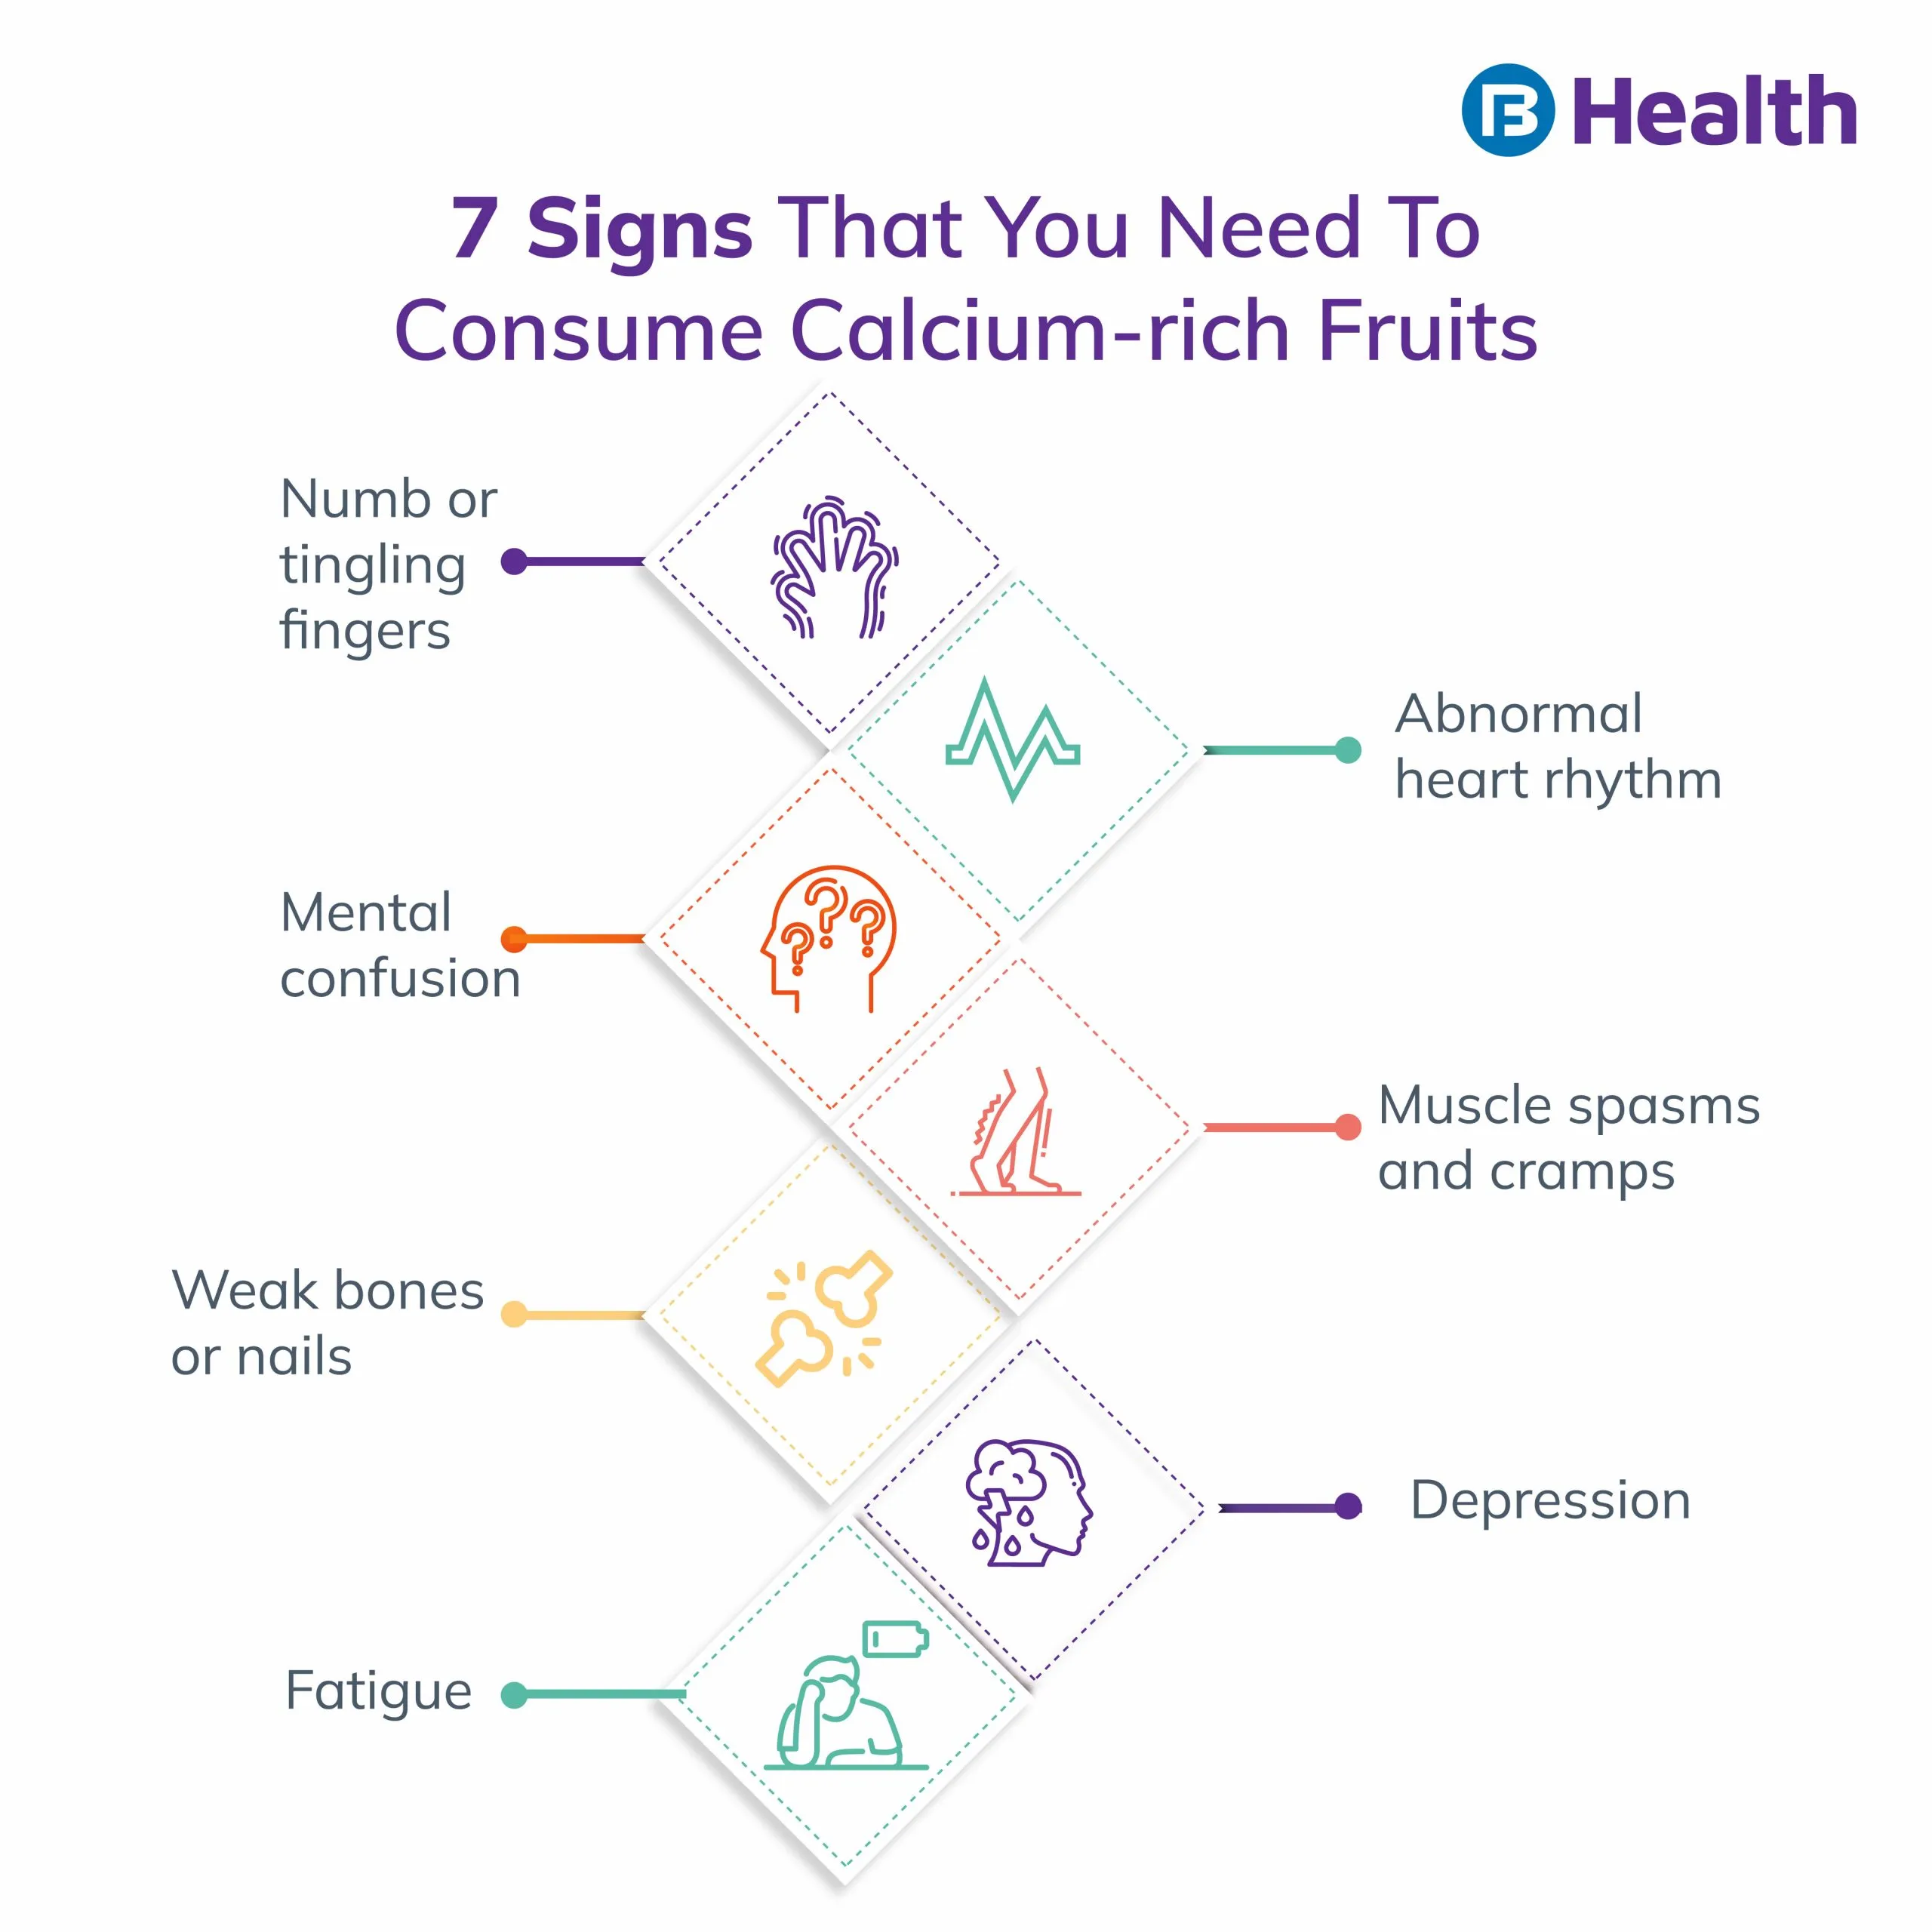 need of Calcium-Rich Fruits infographic